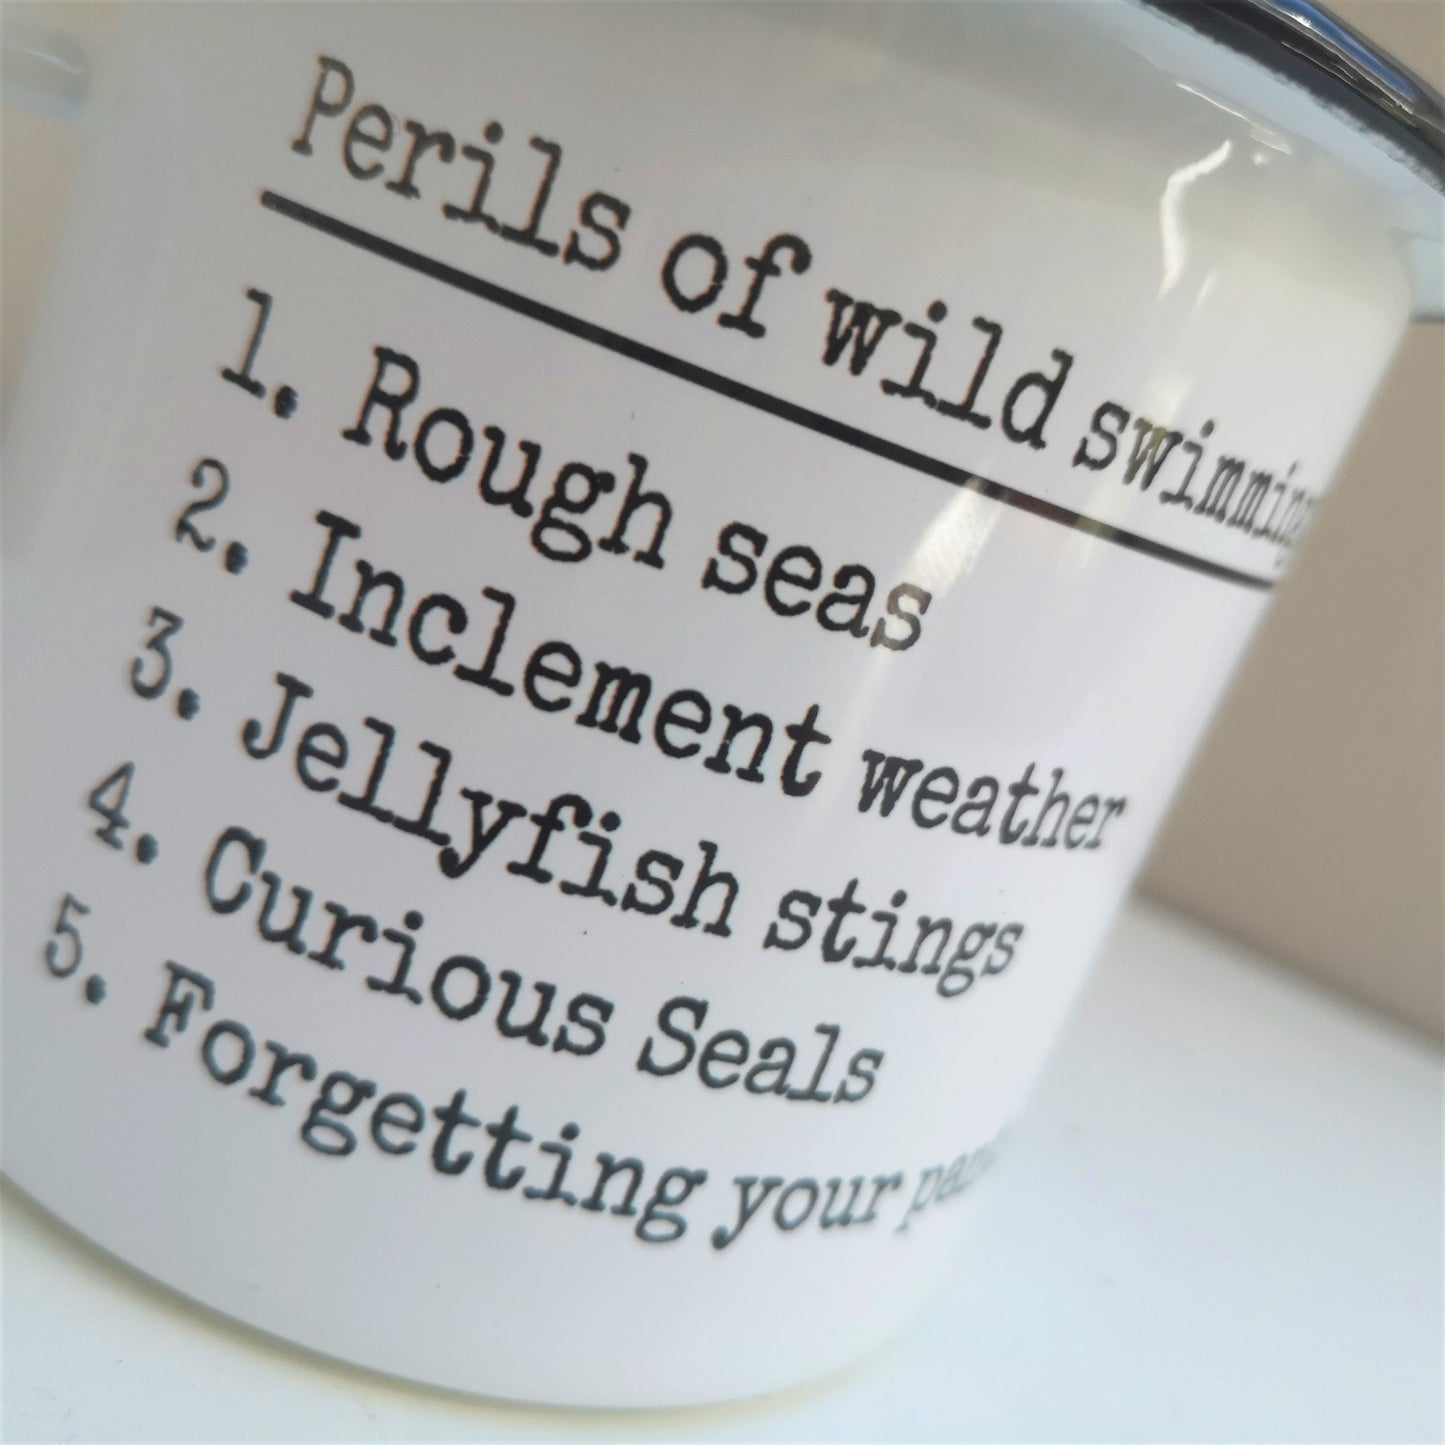 A close up photo of a White enamel mug with a black rim with the following on the front - Perils of wild swimming: Rough seas, Inclement weather, Jellyfish stings, curious seals, Forgetting your pants.